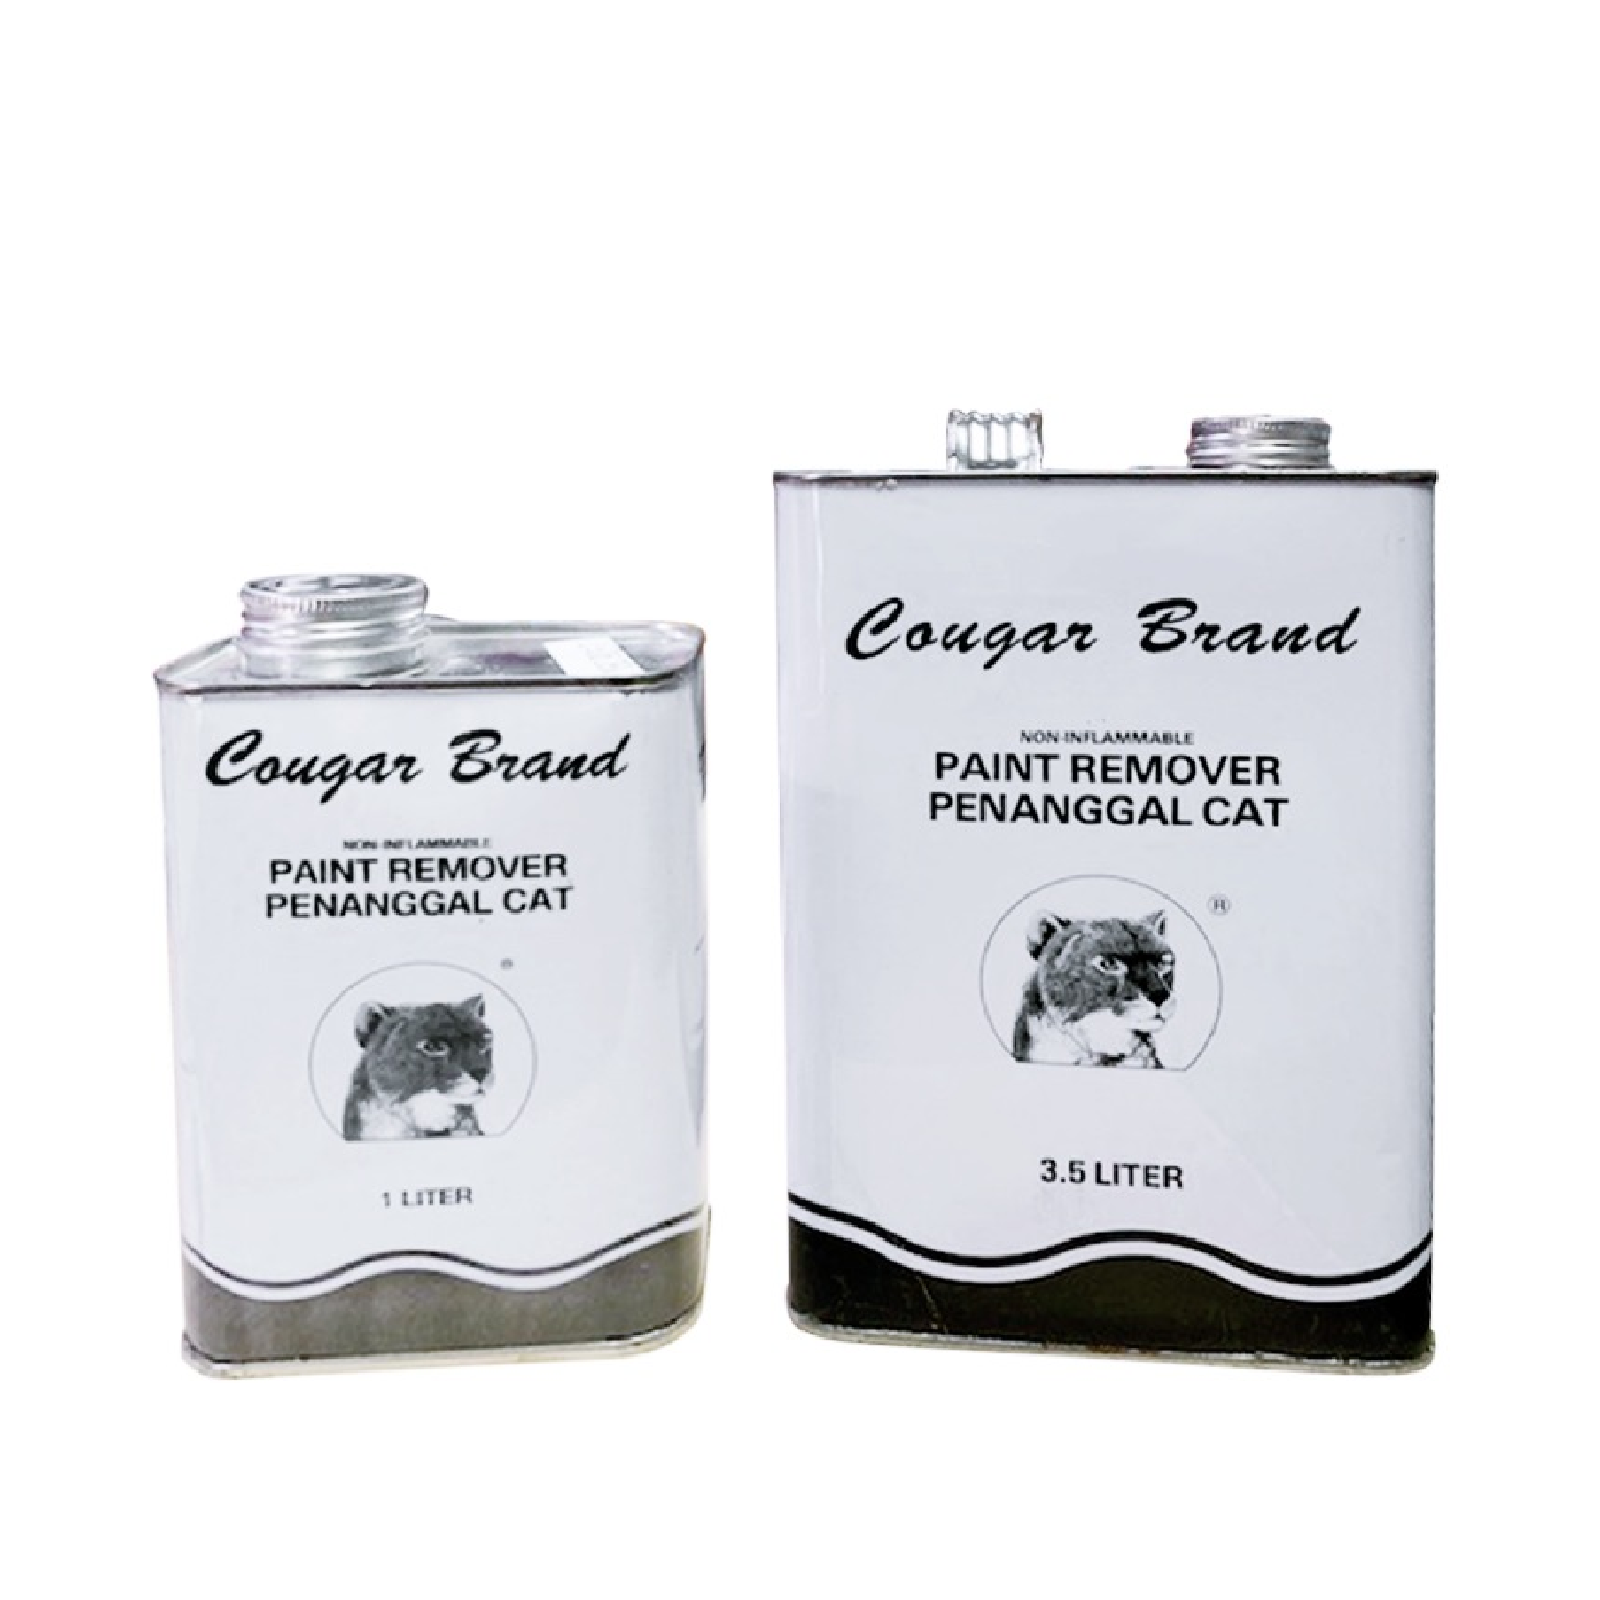 Cougar Brand Paint Remover